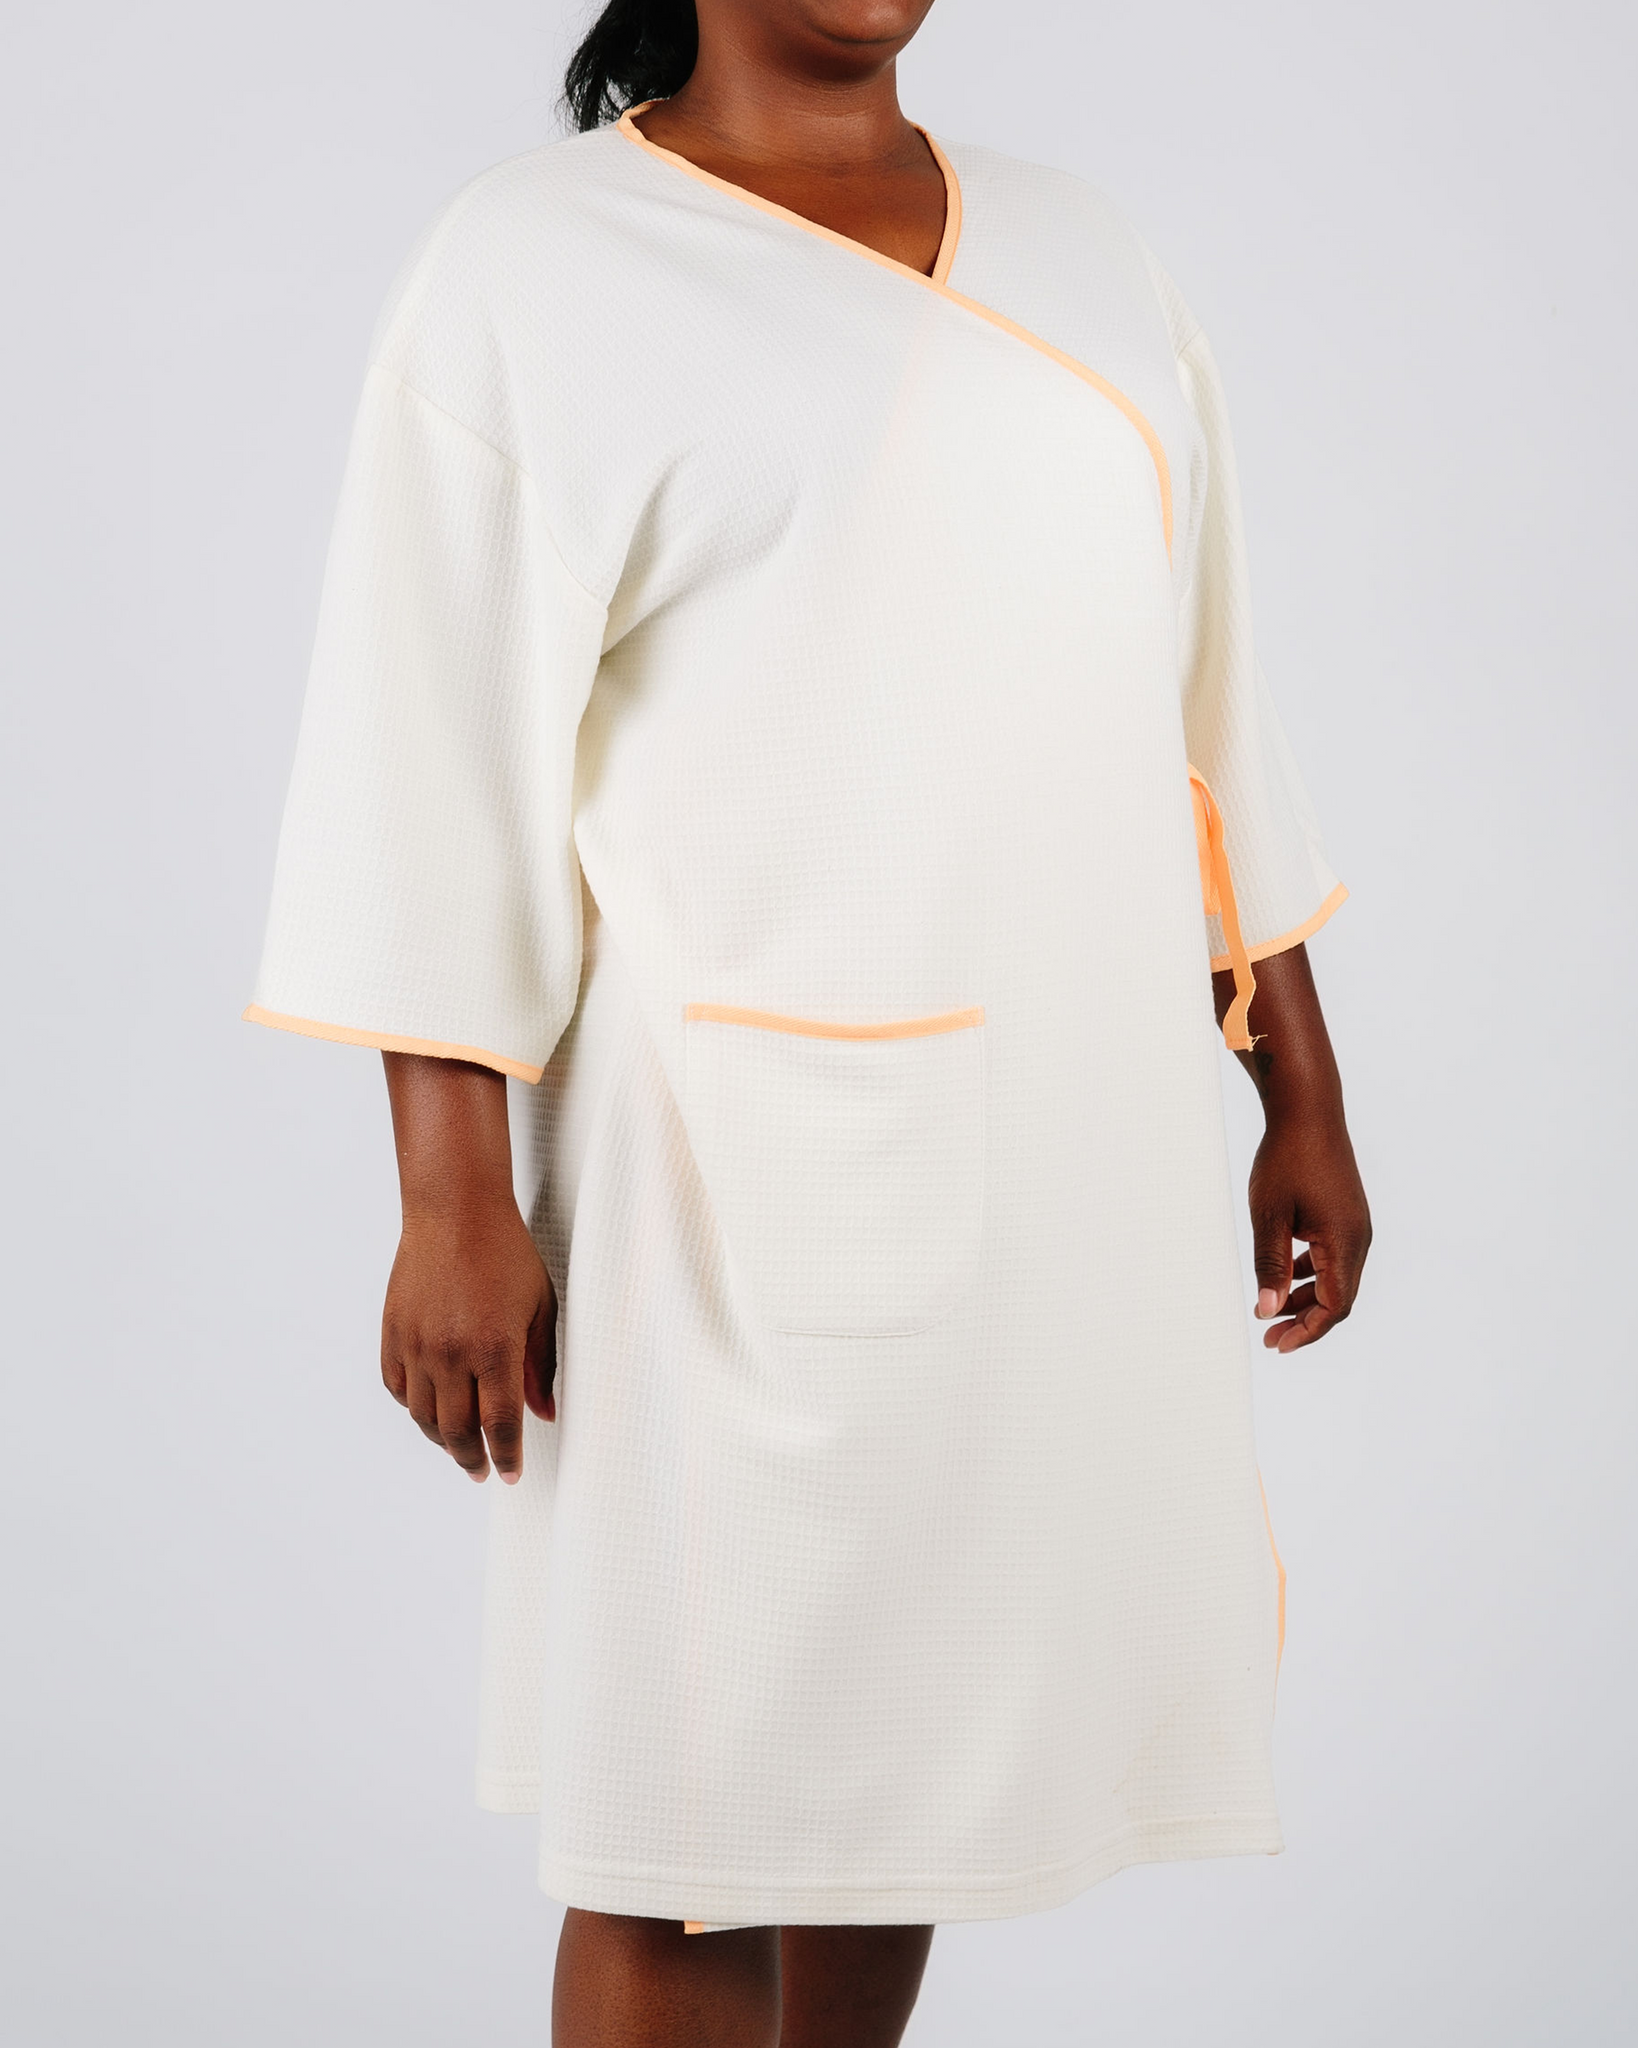 Plus size hospital gown and pants  The Size Experts